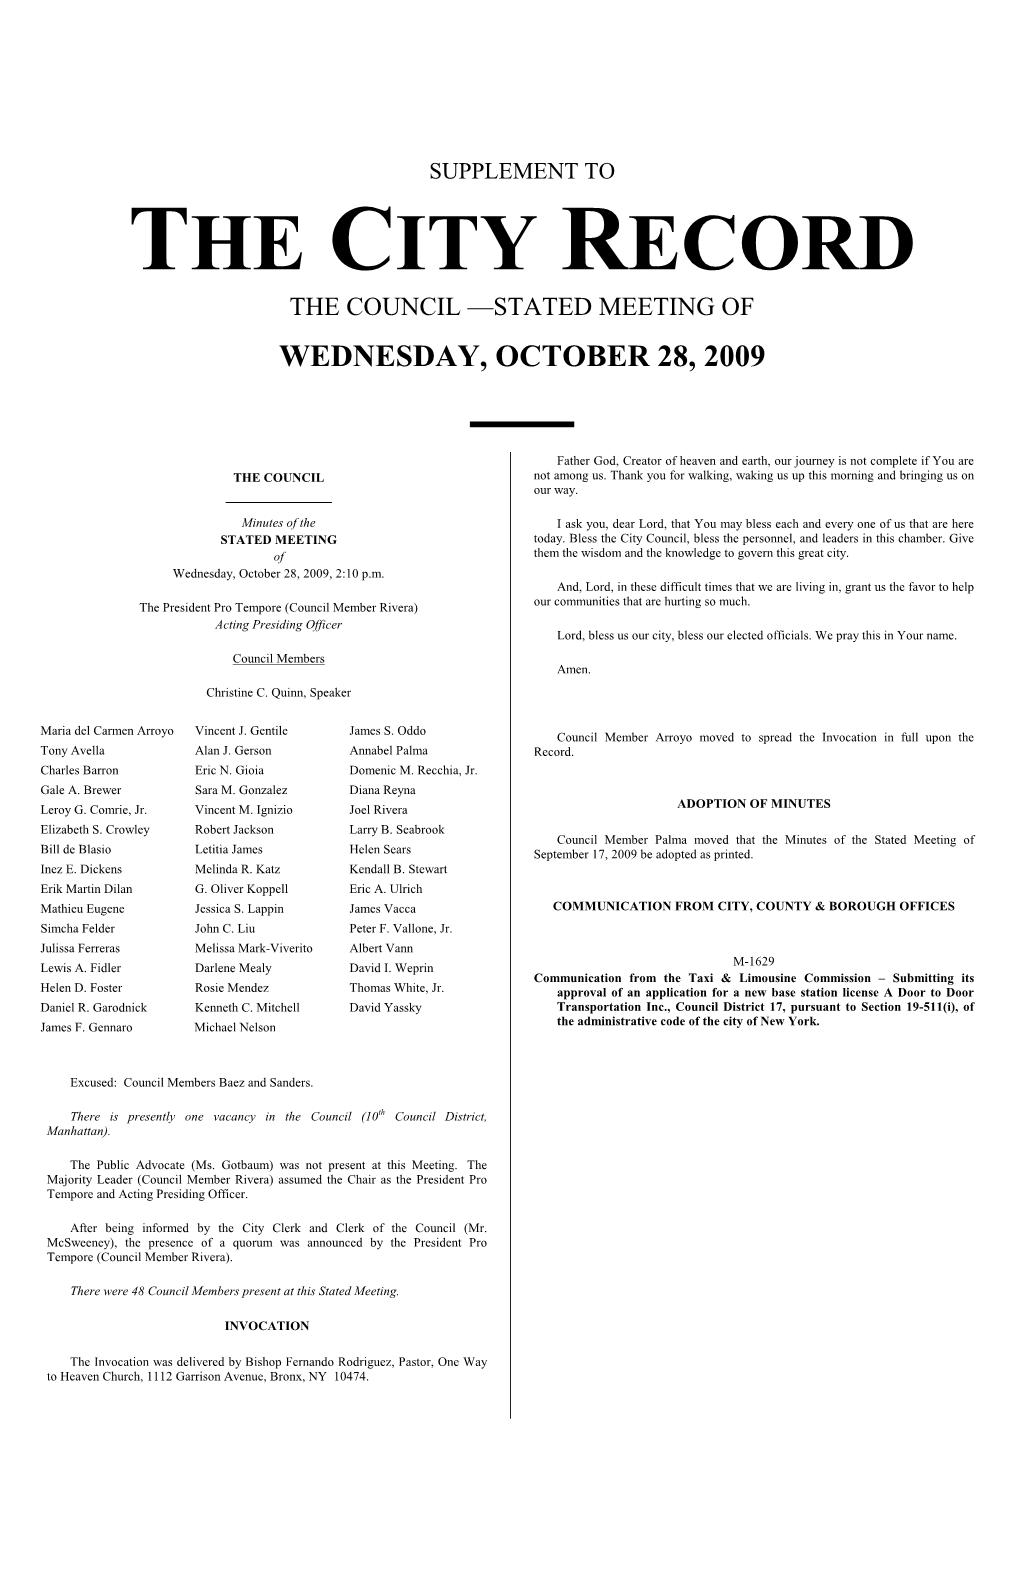 The City Record the Council —Stated Meeting of Wednesday, October 28, 2009